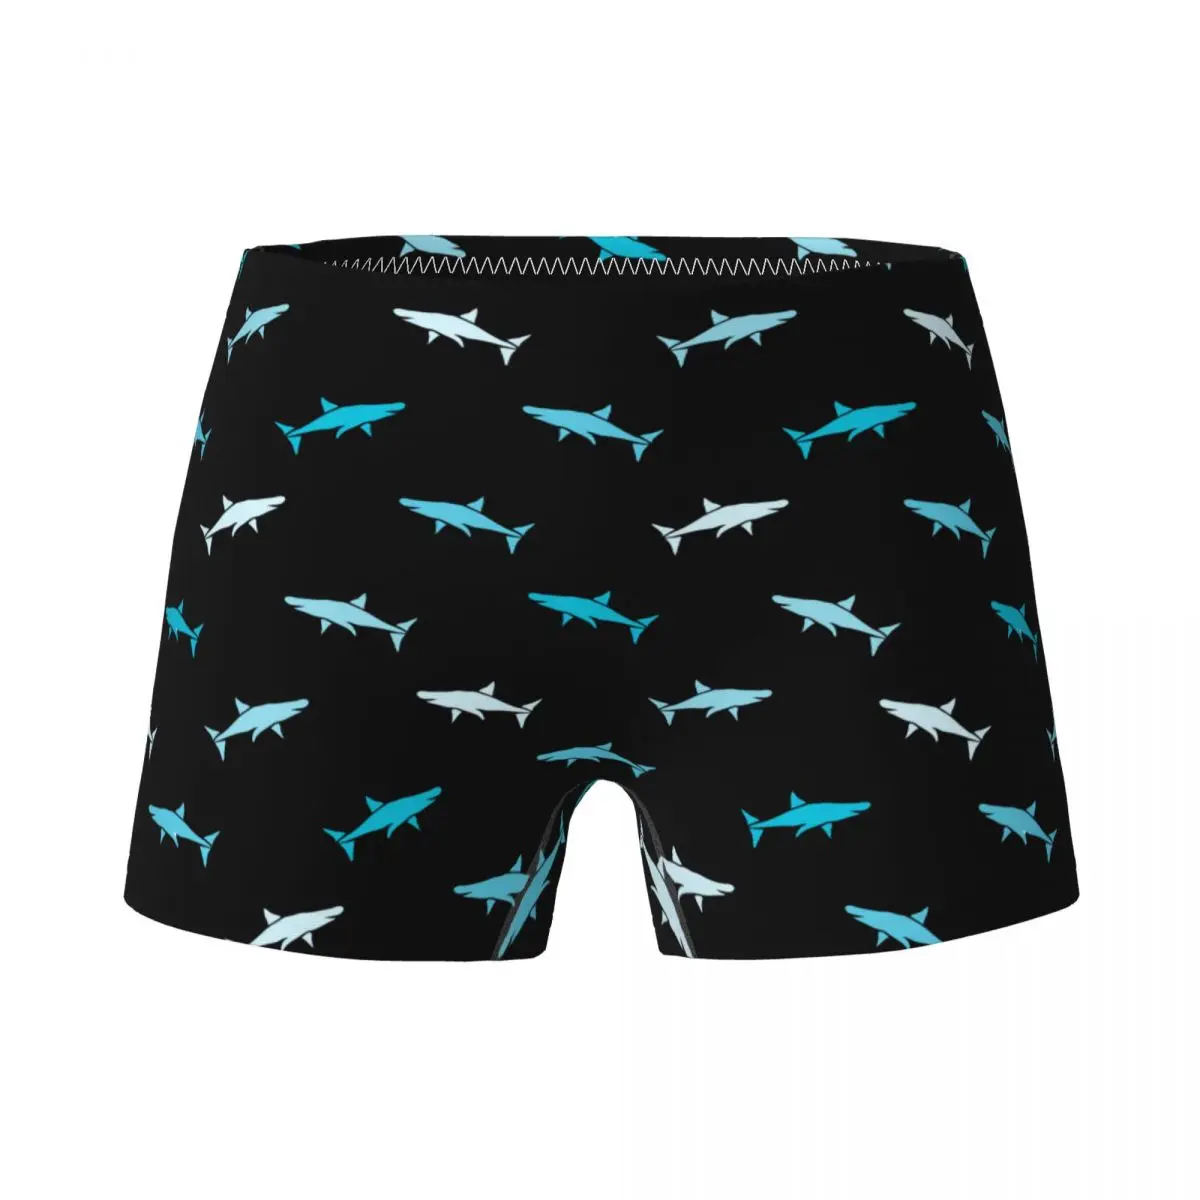 

Colorful Sea Shark Animal Children's Girl Underwear Kids Boxers Shorts Breathable Pure Cotton Teenagers Panties Underpants 4-15Y